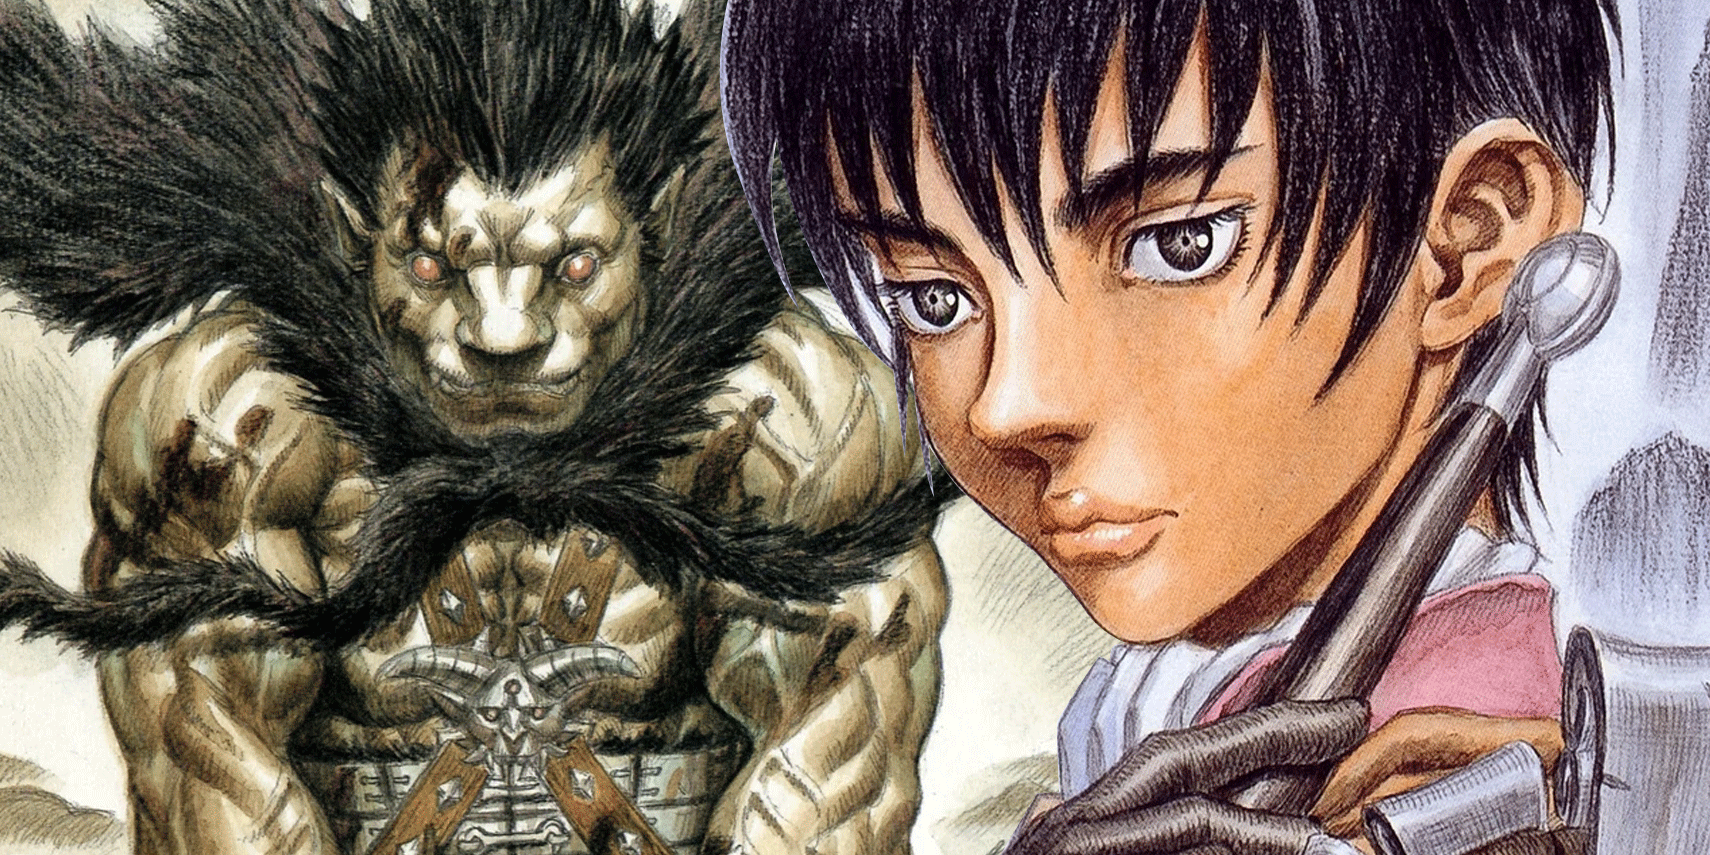 10 Things Manga Fans Need To See In The New Berserk Anime